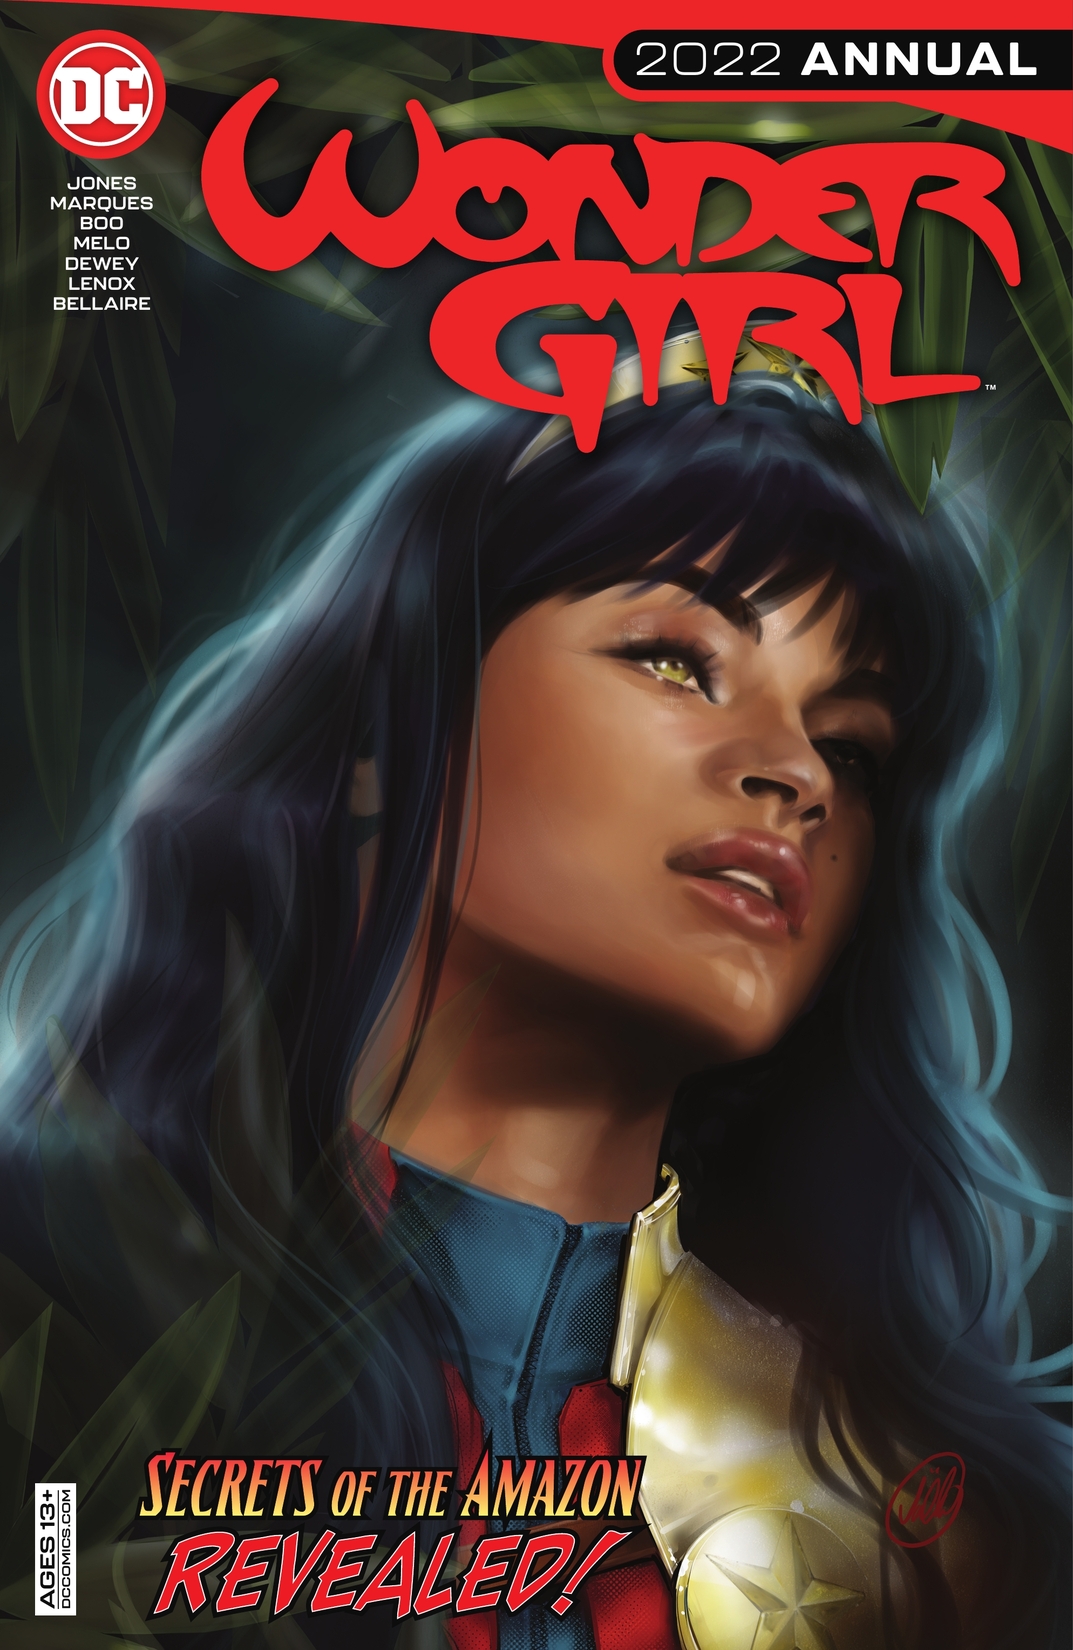 Wonder Girl 2022 Annual #1 preview images